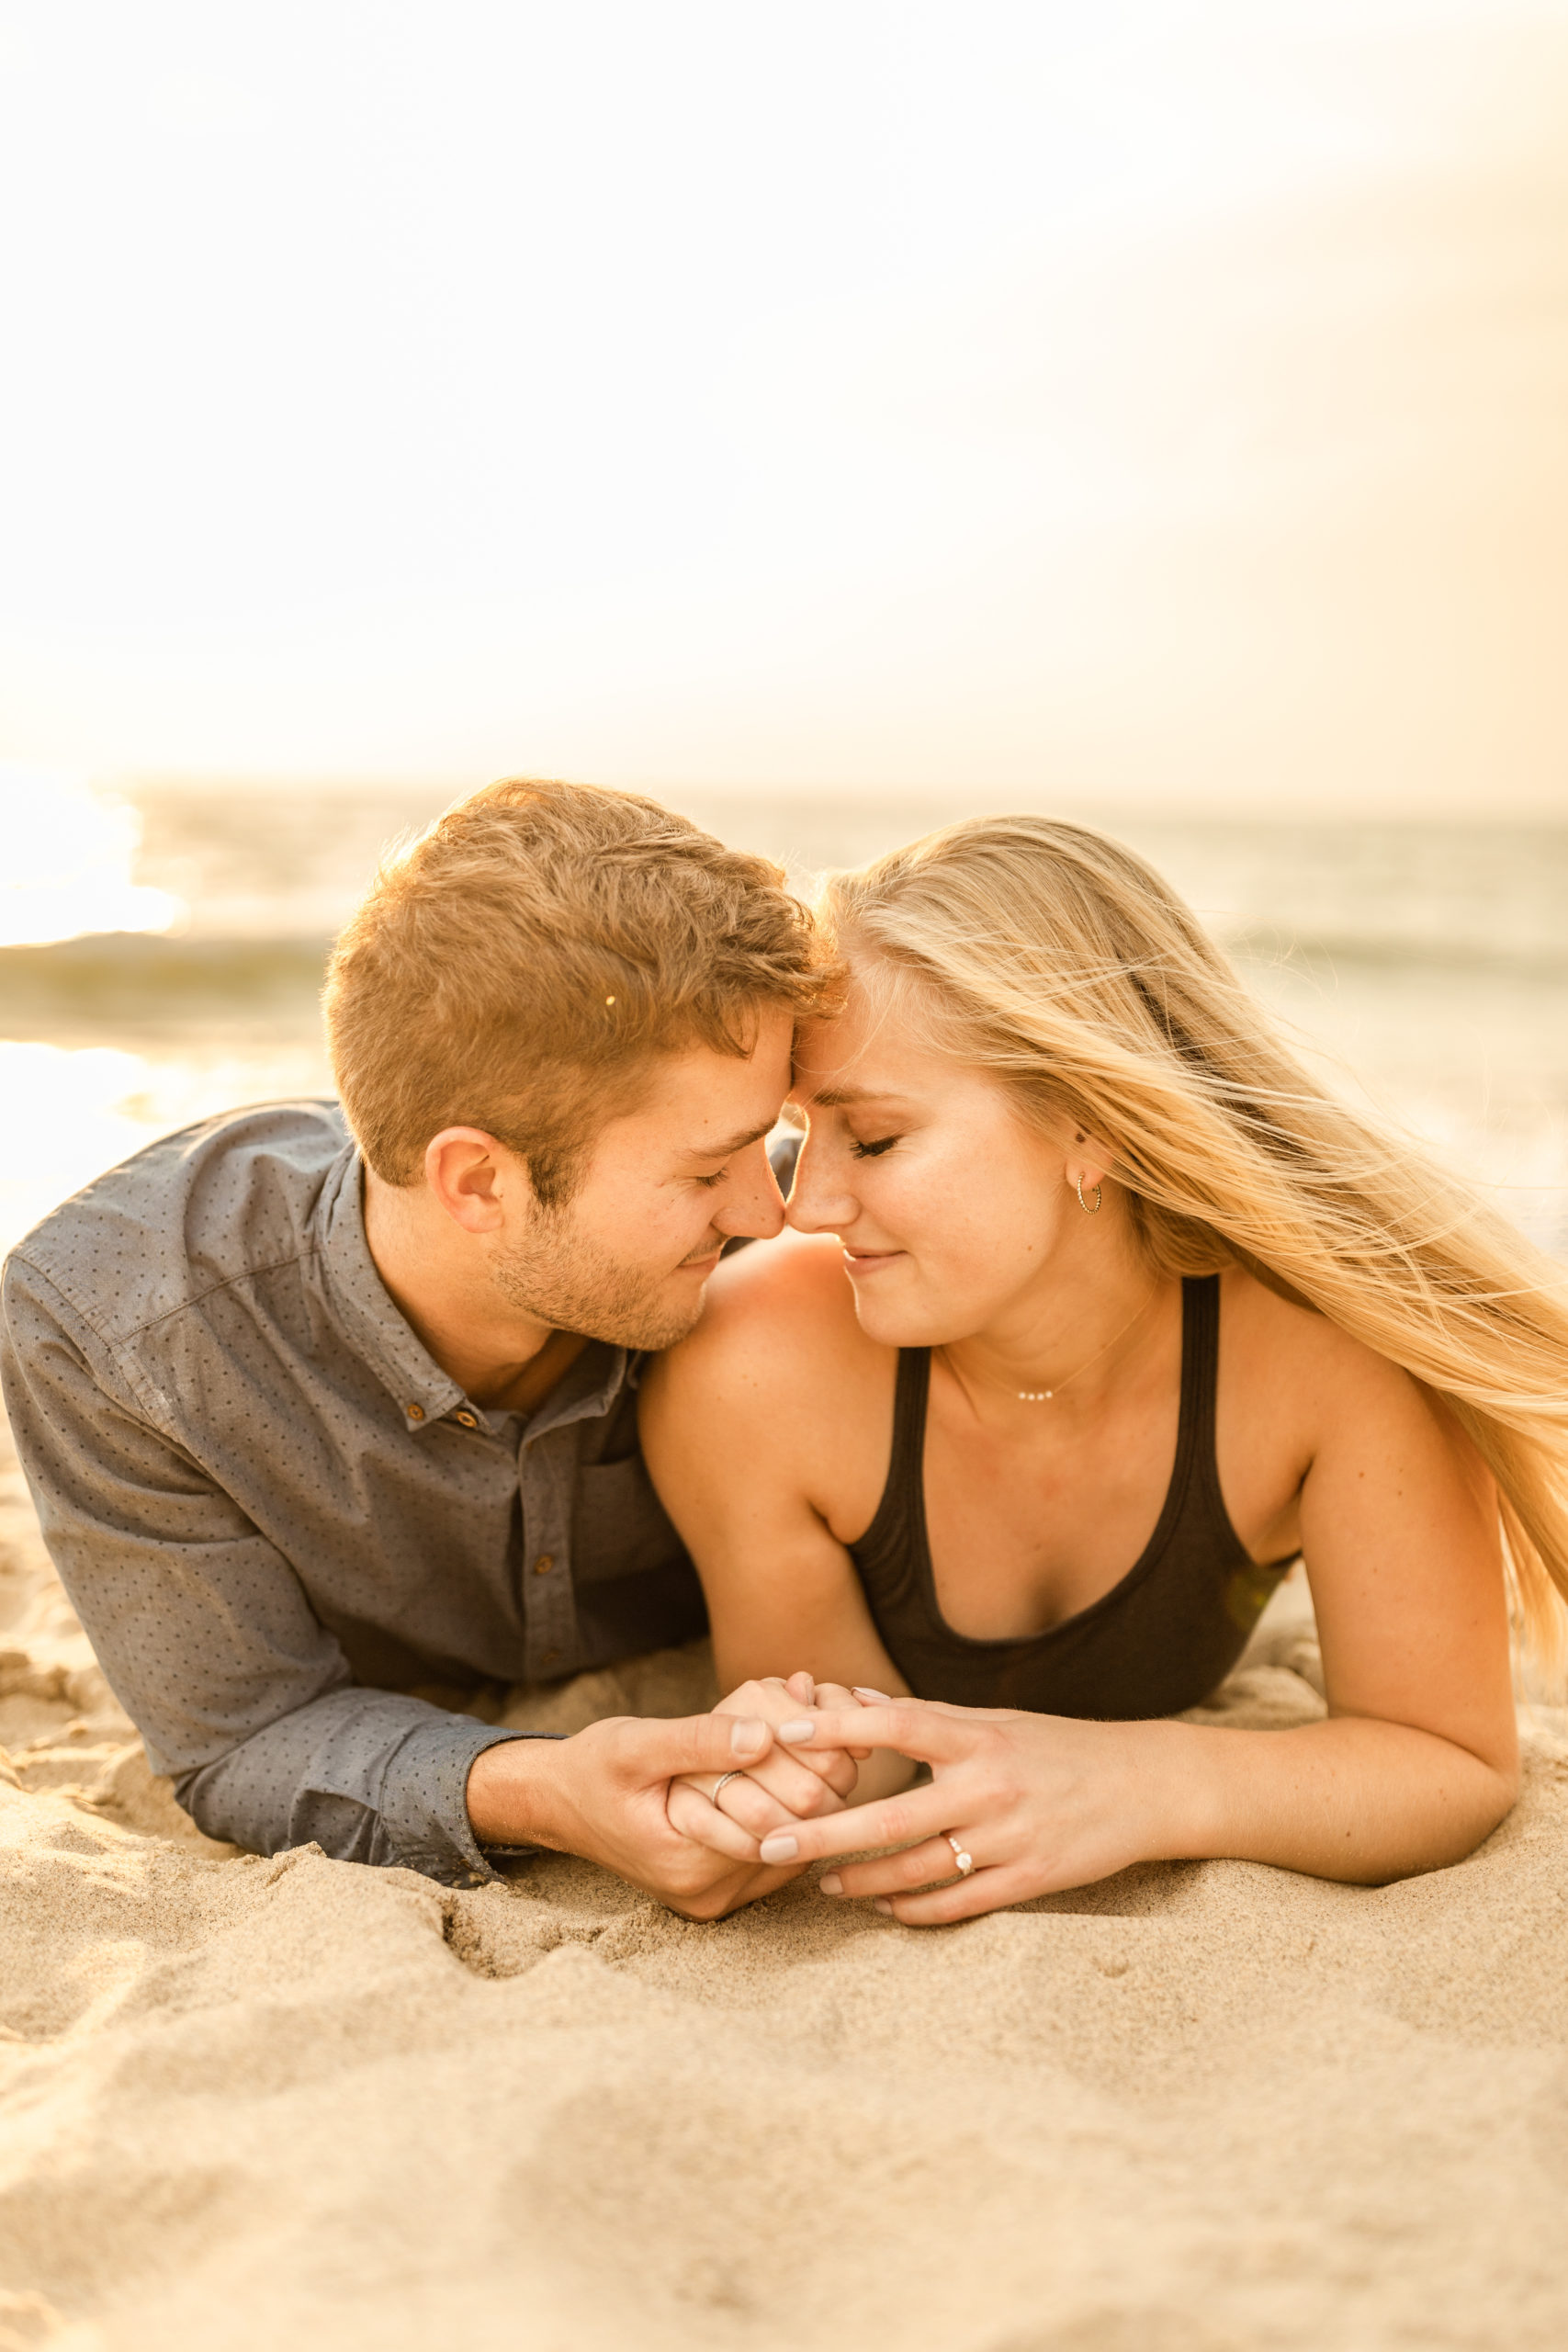 couple engagement photoshoot session at beach on Lake Michigan unique poses and ideas